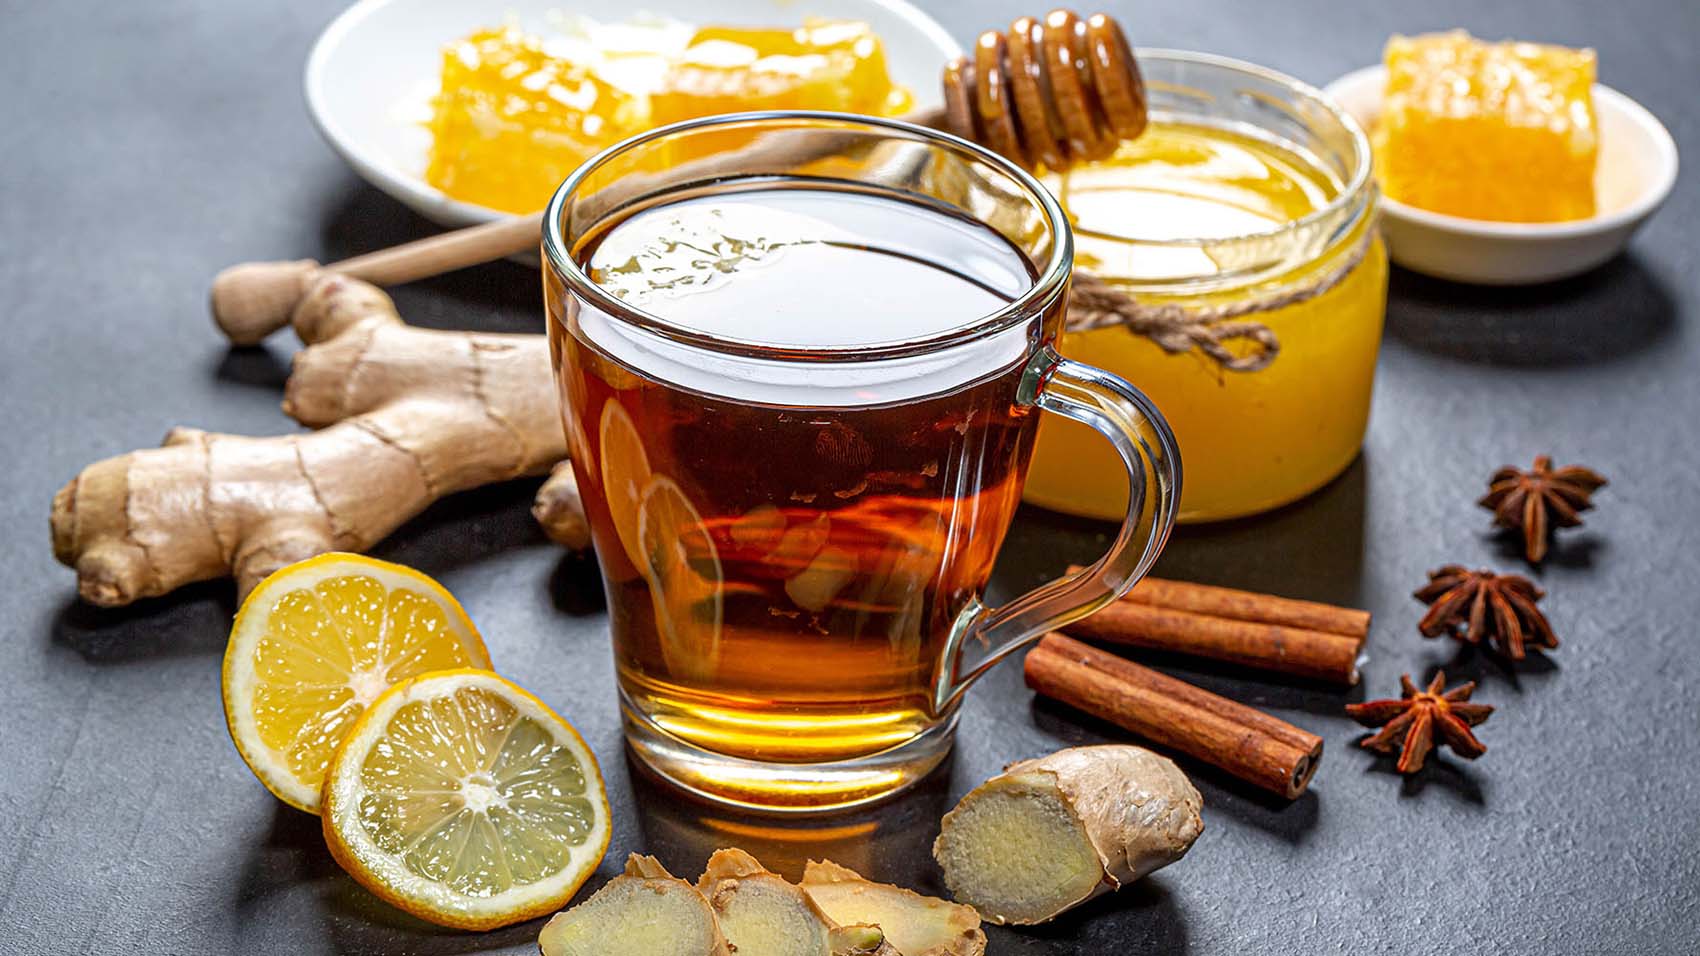 ginger tea is a coffee alternative